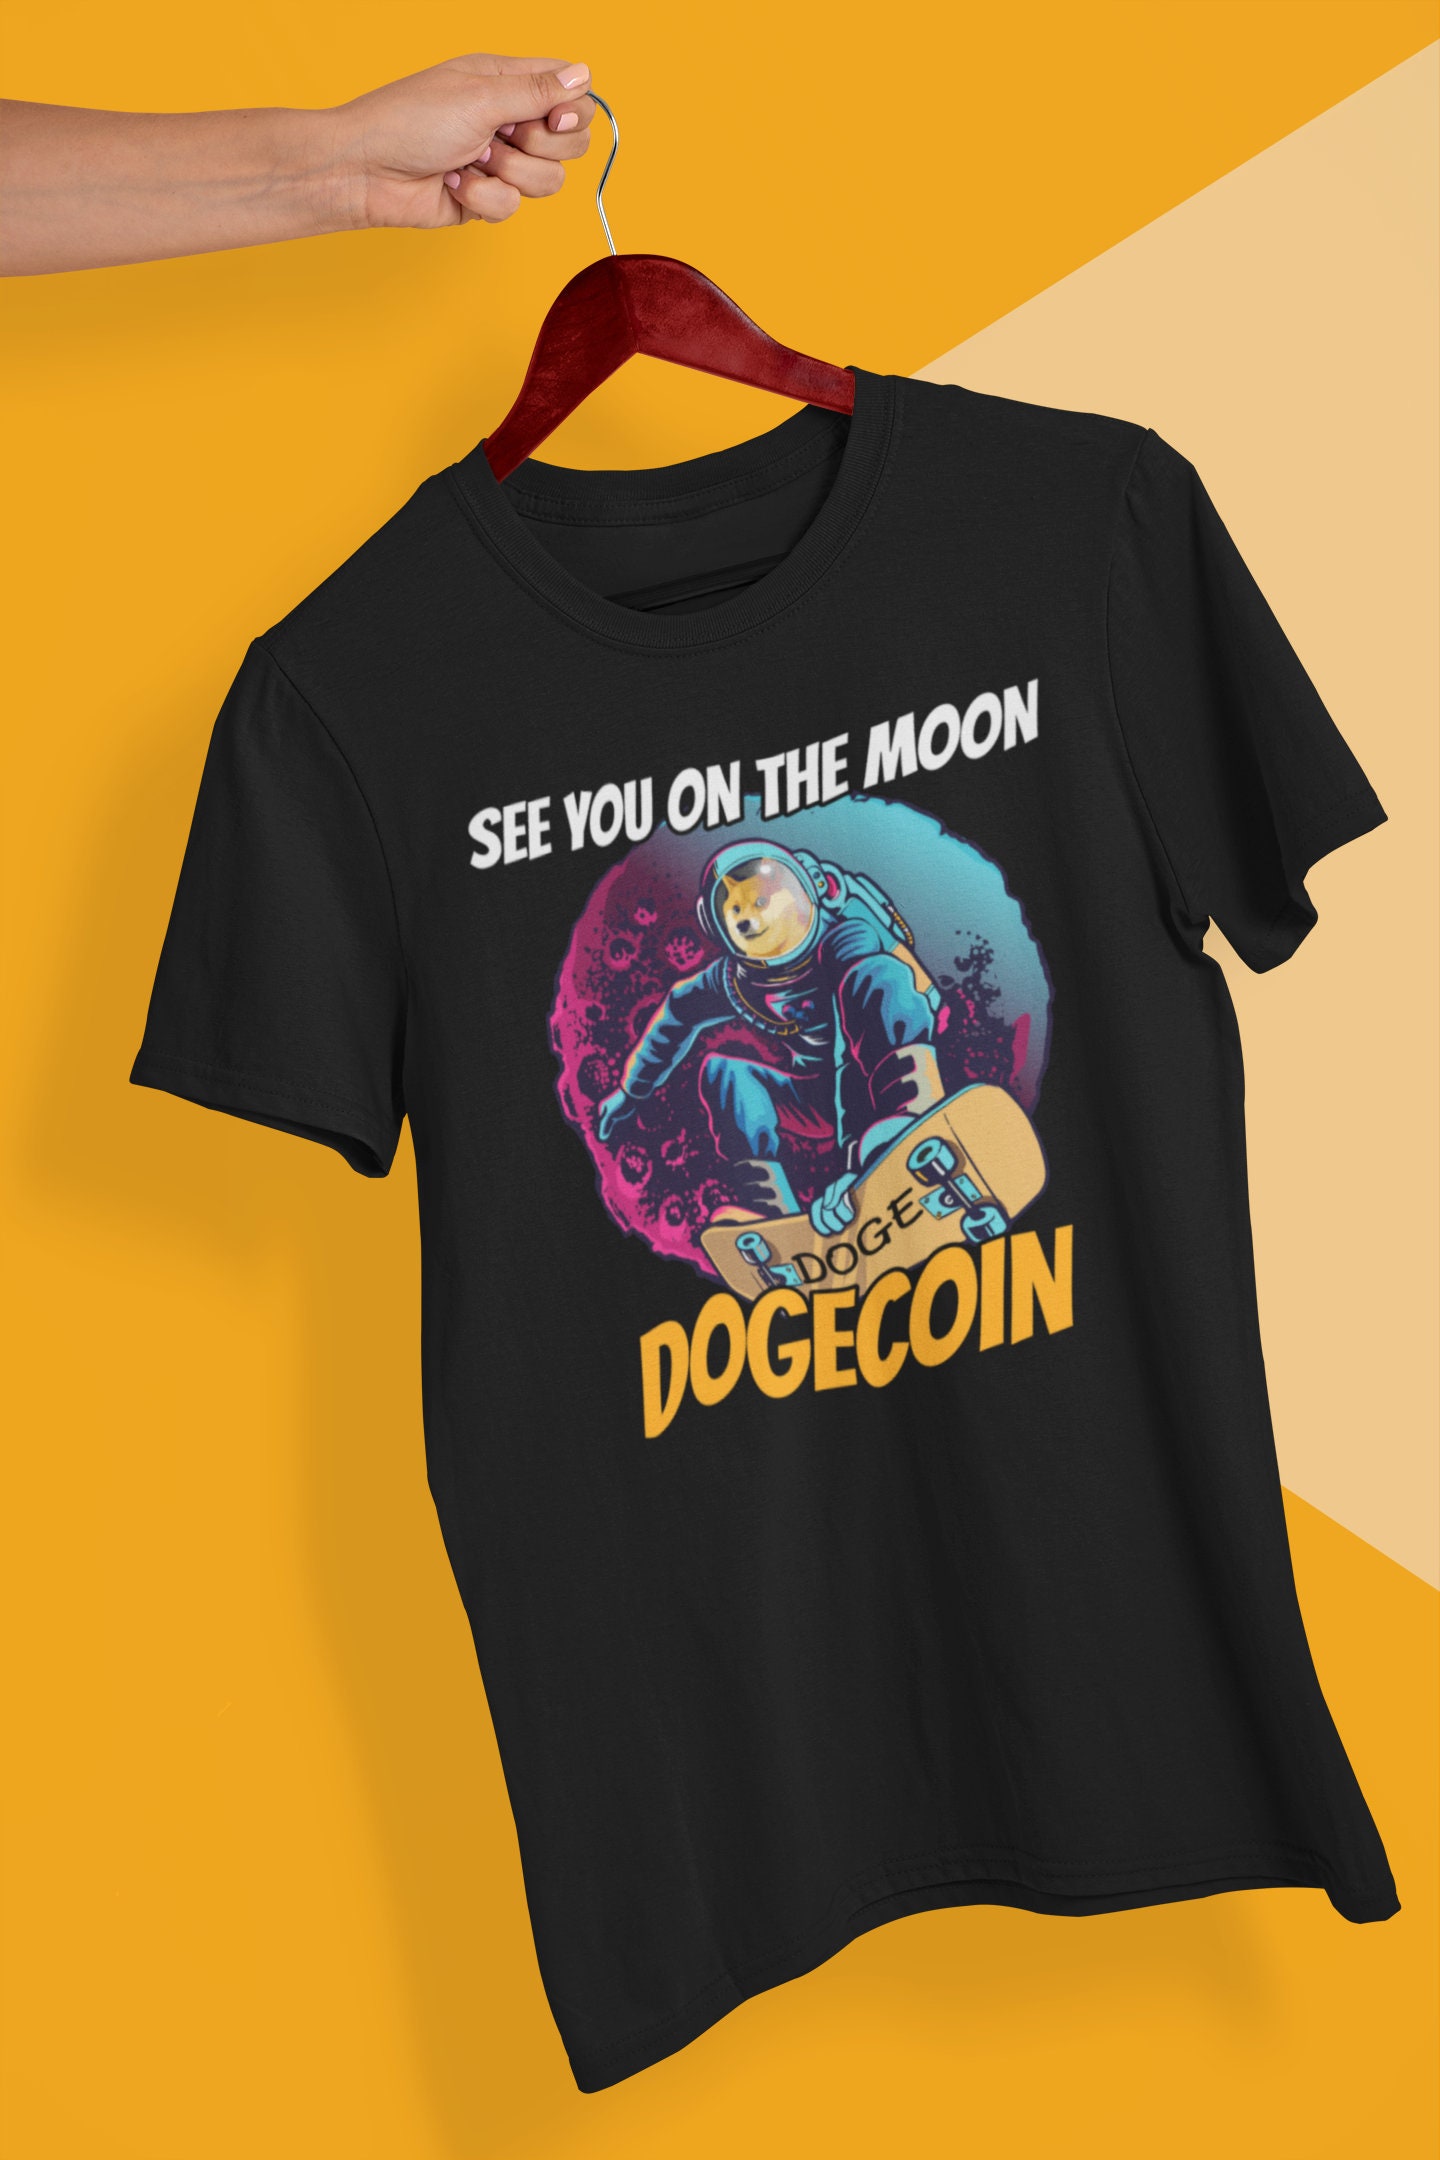 See You on the Moon Dogecoin Shirt Crypto T Shirt DOGE | Etsy